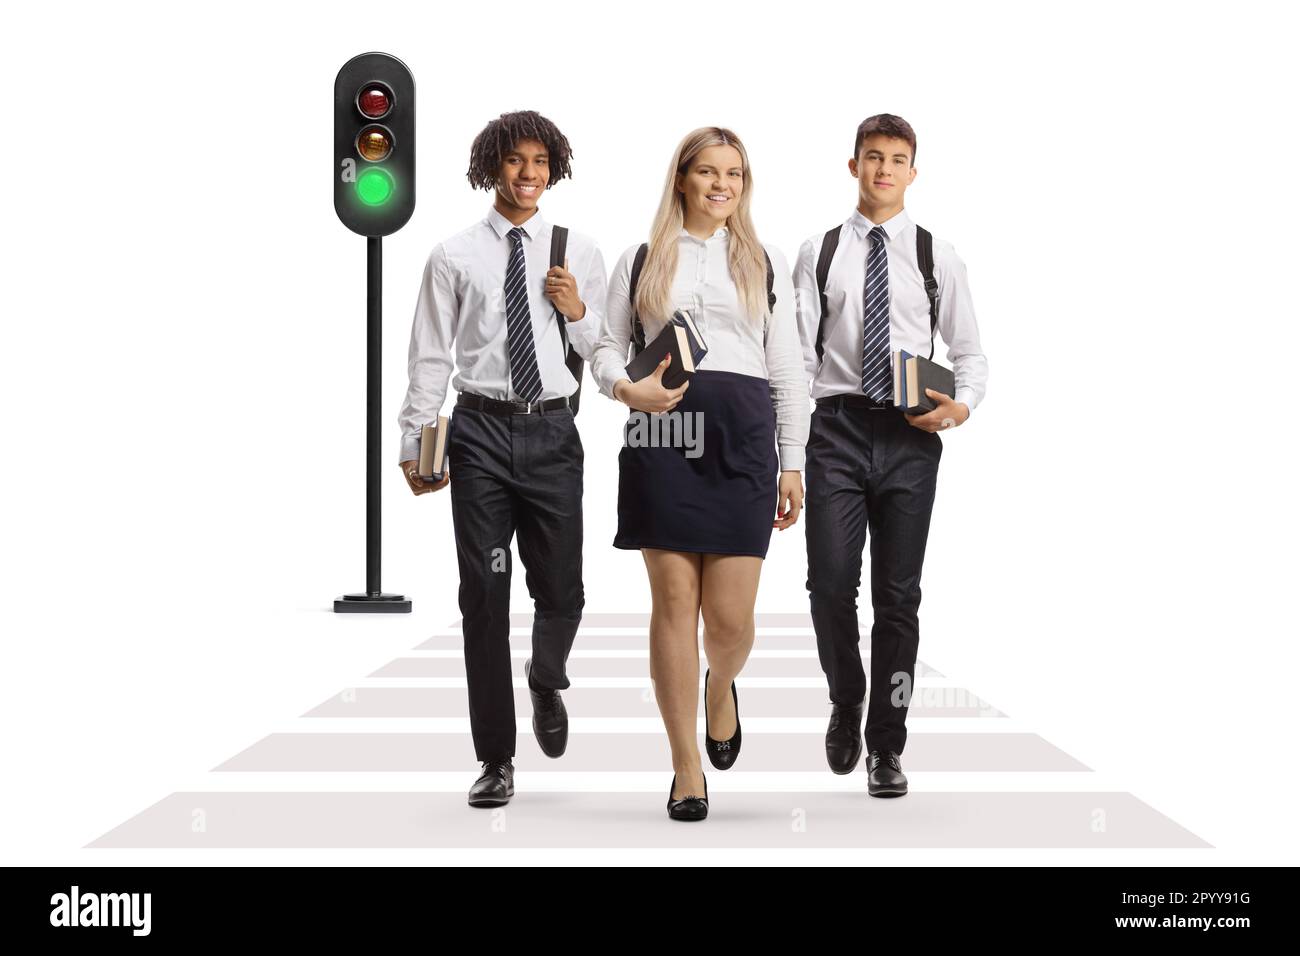 Full length portrait of a group of college students carrying books and crossing street at green traffic light isolated on white background Stock Photo